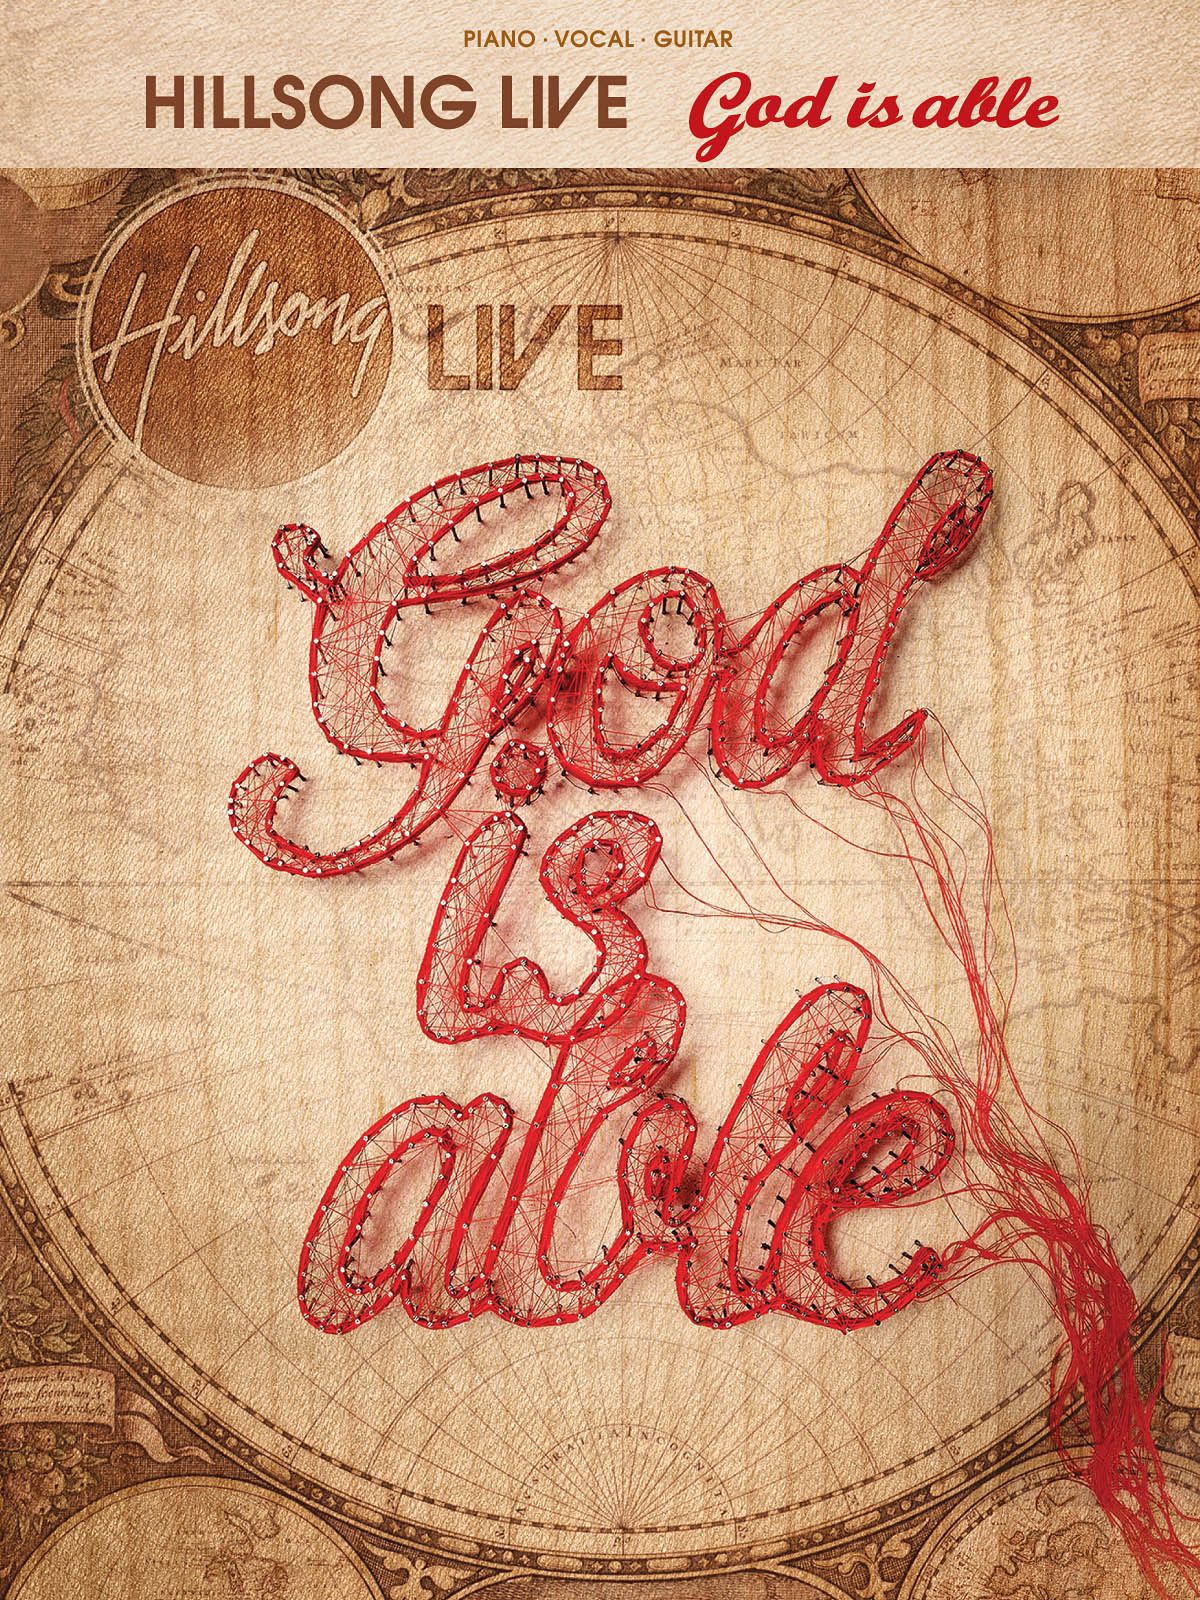 Hillsong: Hillsong Live - God Is Able: Piano  Vocal and Guitar: Mixed Songbook